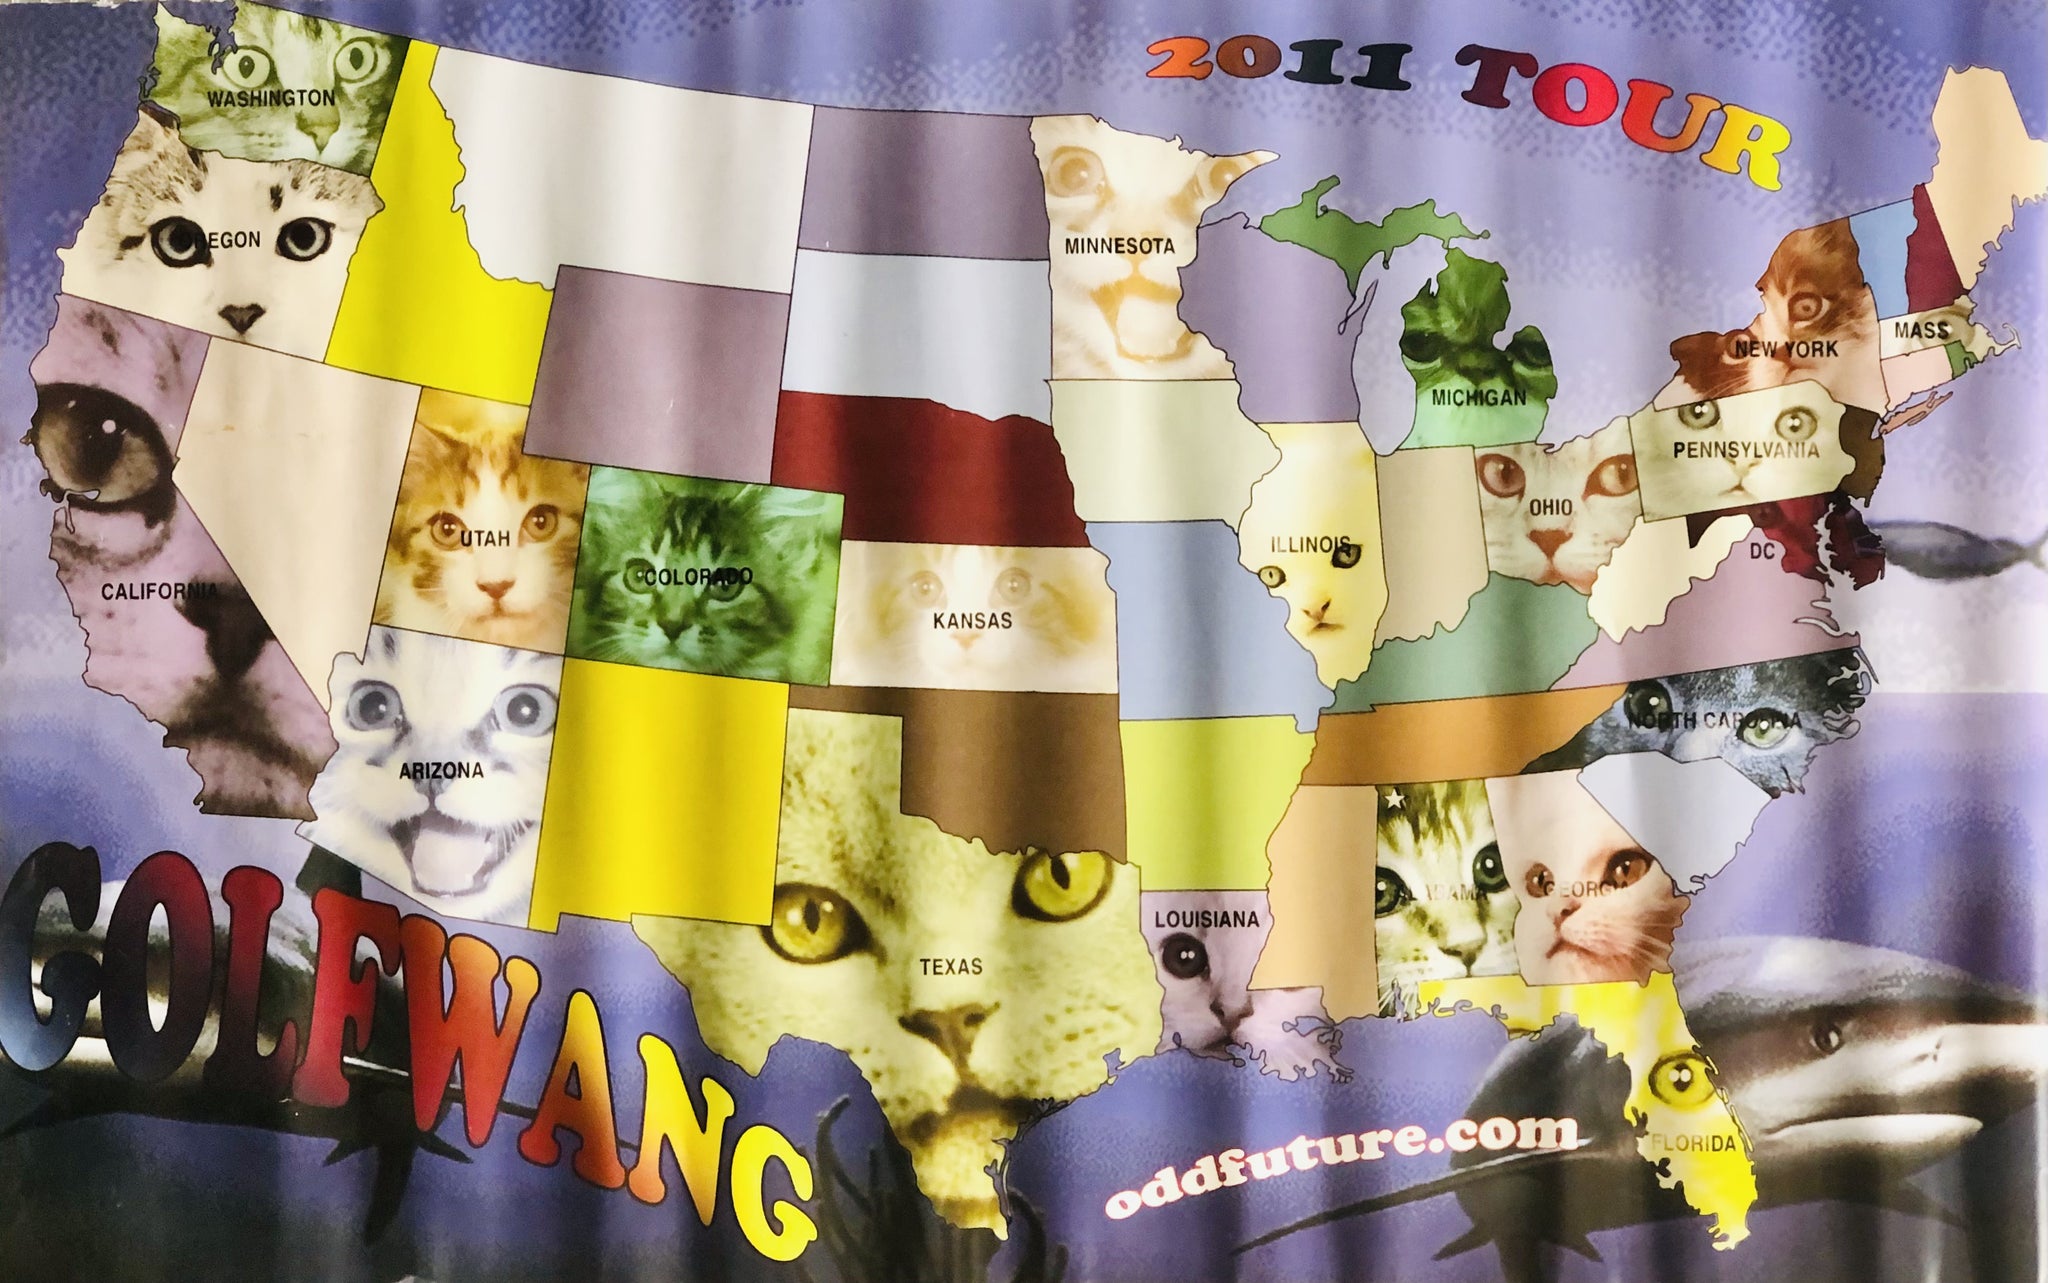 Odd Future - Golf Wang 2011 - 17" x 27" Double-sided Tour Poster p0092